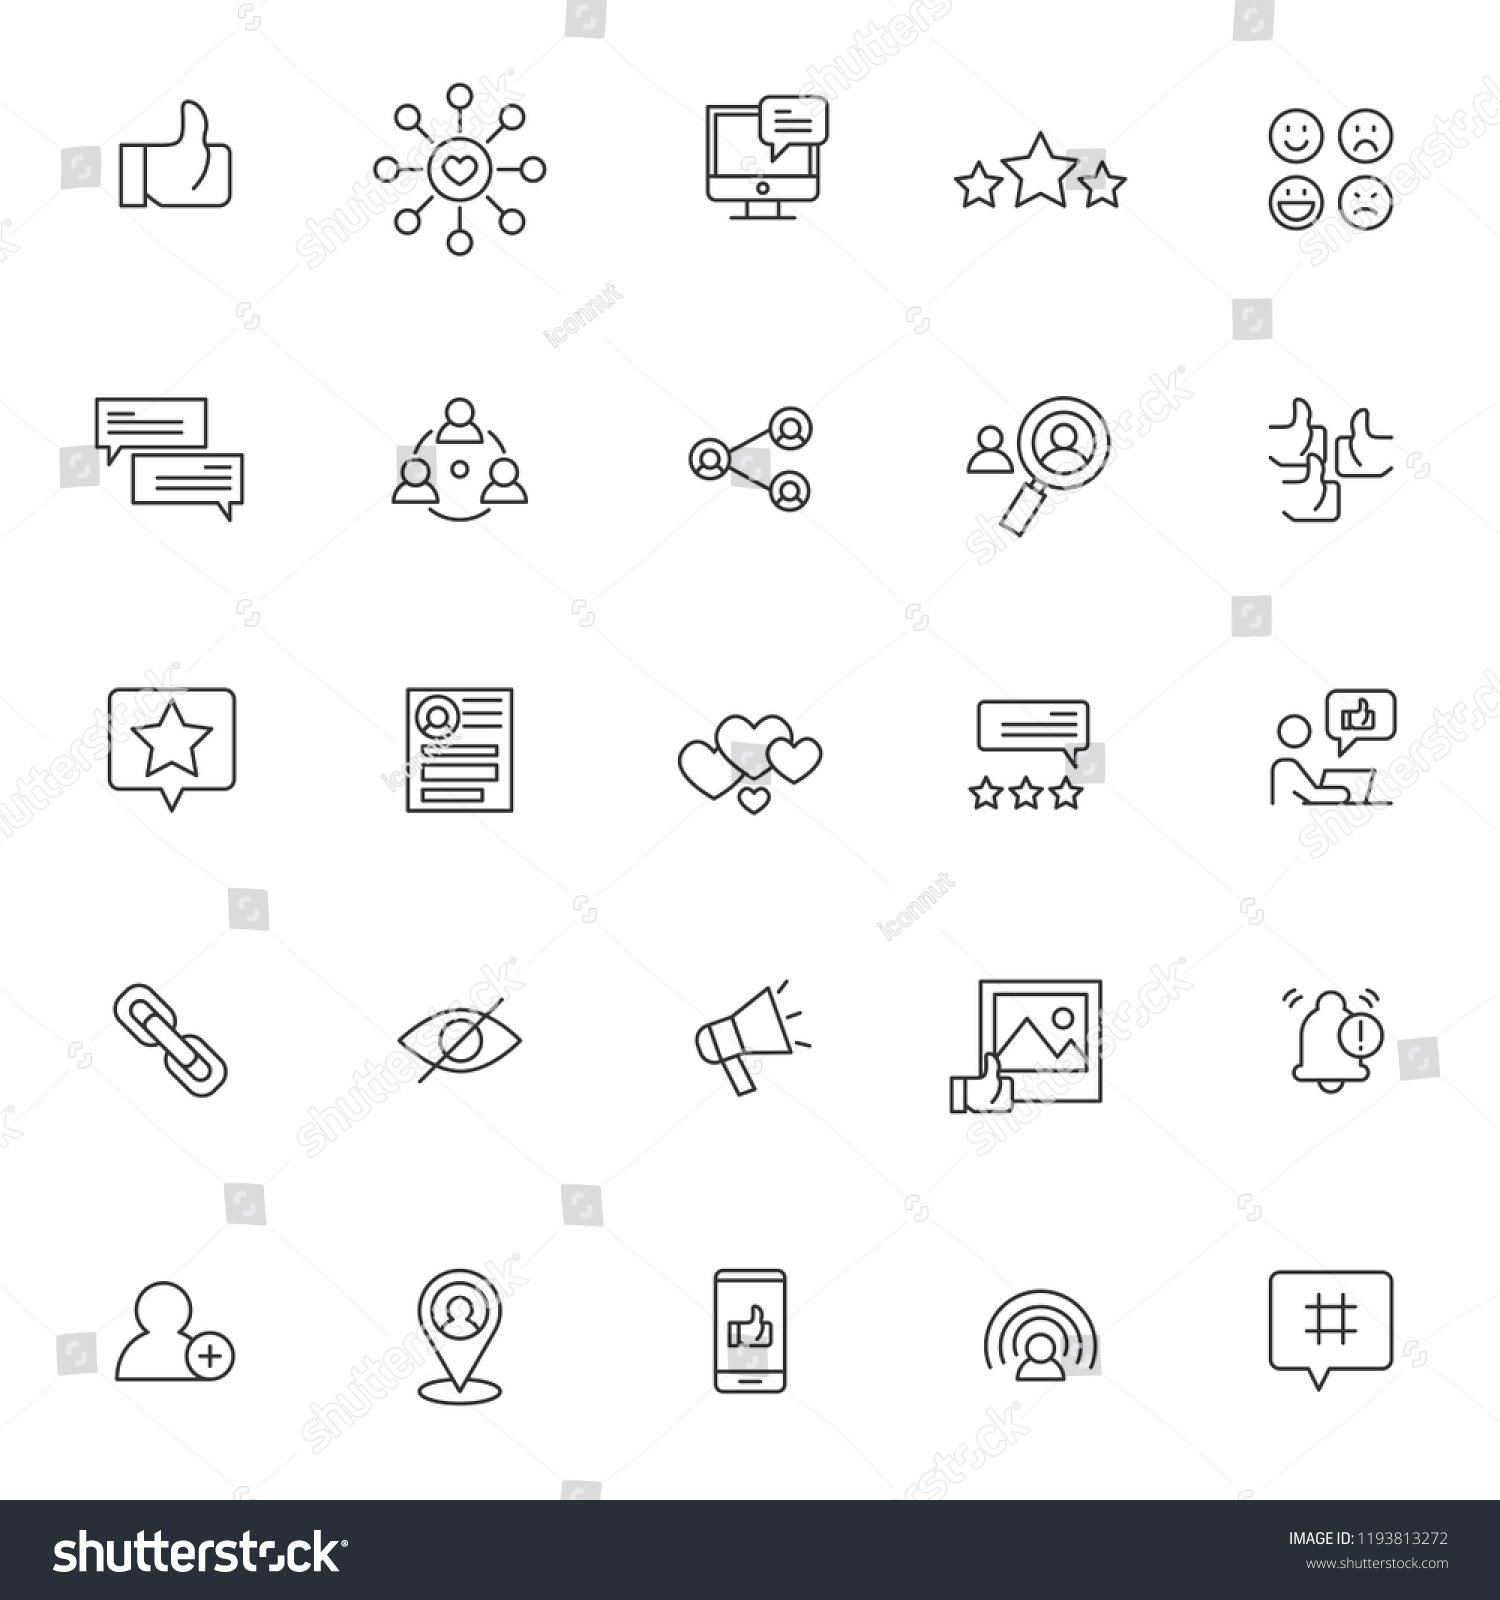 set of social media influencer related icon with simple outline and editable stroke #1193813272